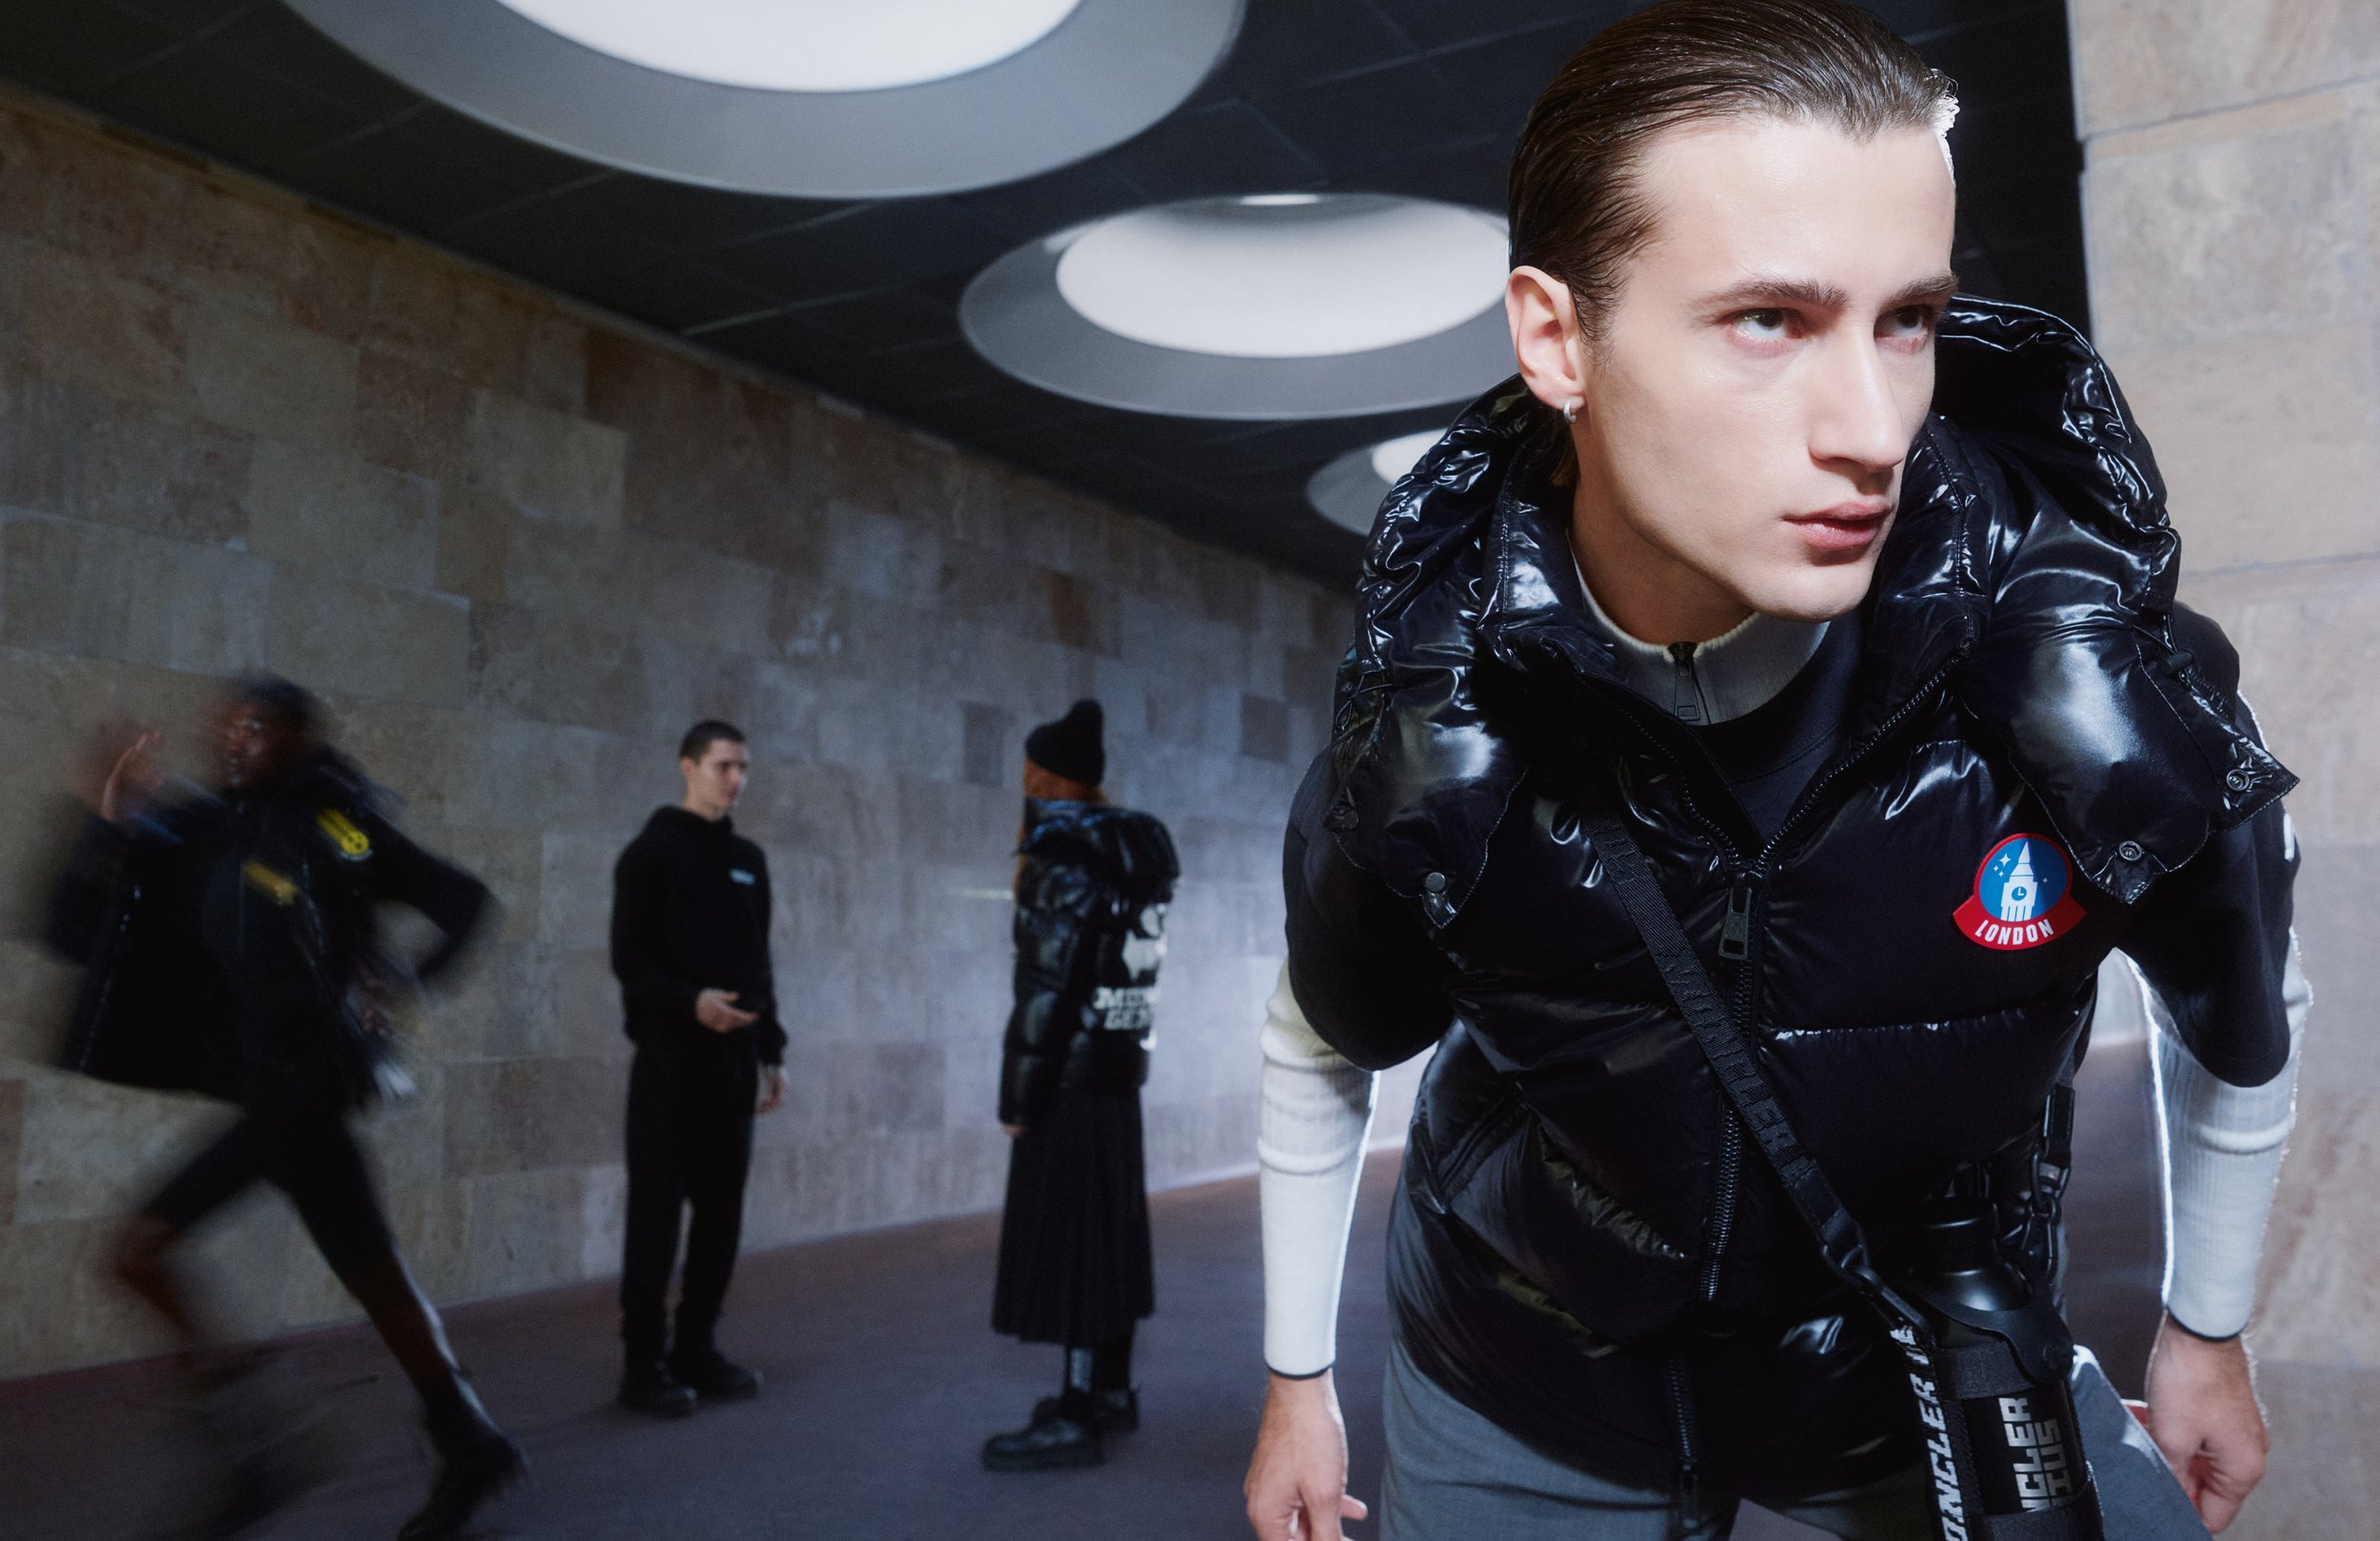 MONCLER HOUSE OF GENIUS 2021_EDITORIAL IMAGES_3.jpg